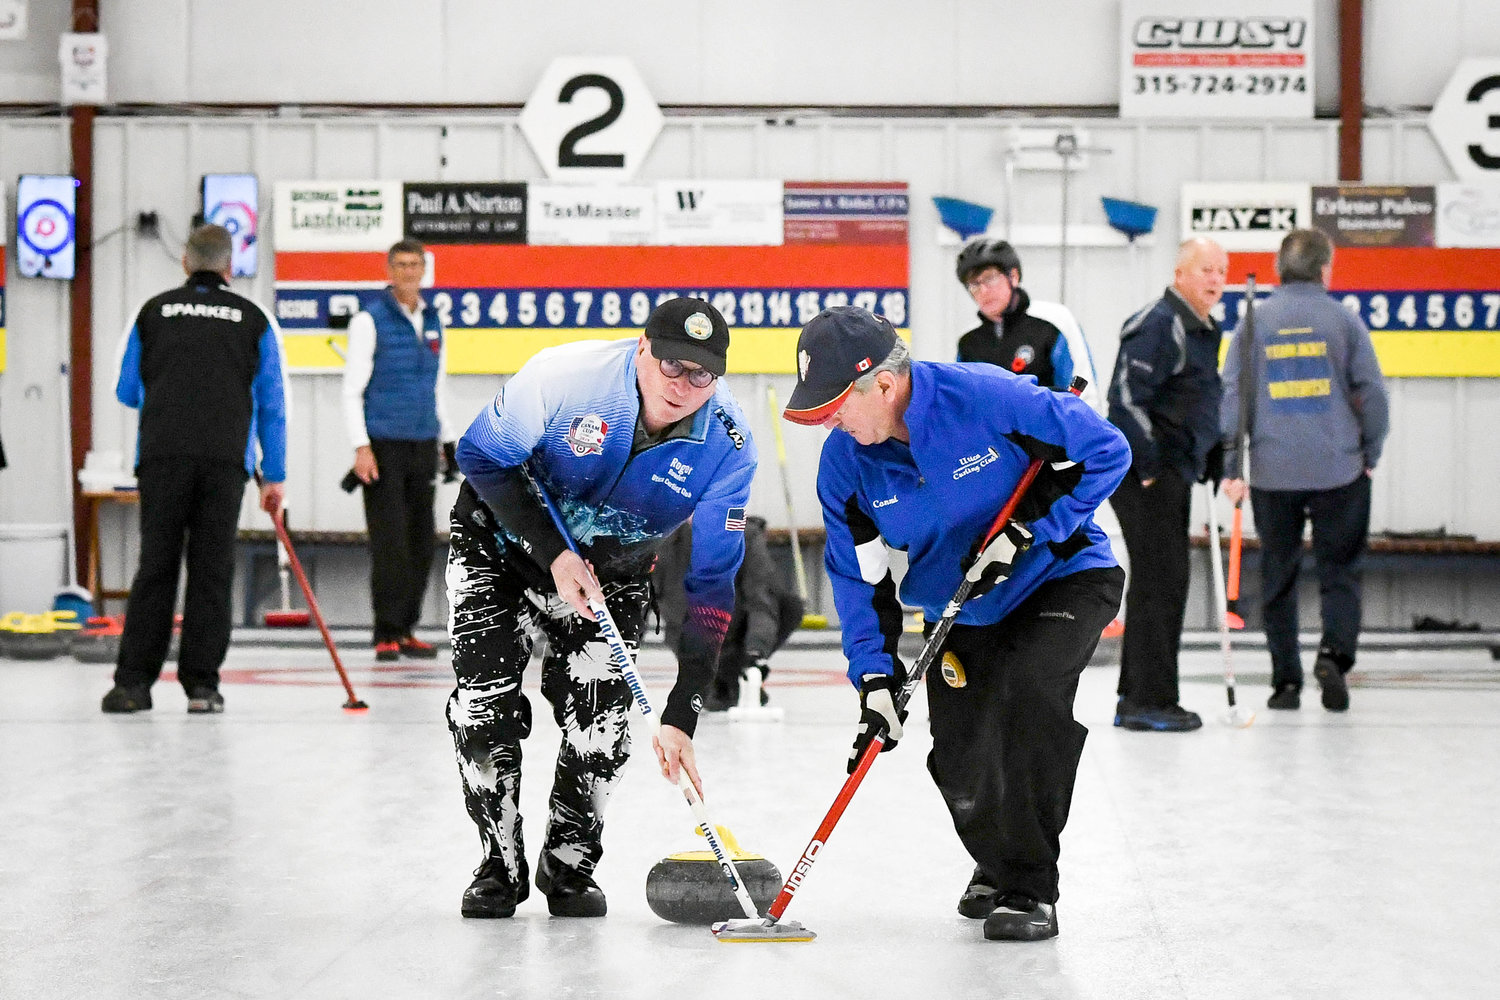 2022 ROSS TARLTON COMPETITION — Roger Rowlett and Conrad Law with the Utica 2 team compete in the 53rd annual Ross Tarlton International Bonspiel on Friday afternoon at the Utica Curling Club in Whitesboro. The Utica Curling Club is hosting the event through today at the facility at 8300 Clark Mills Road. It’s an invitational men’s competition pitting teams from clubs in the Ontario Curling Association (OCA) with those from the Grand National Curling Club (GNCC). The competition is a 32-team event (16 from the GNCC and 16 from the OCA), and the winning side is determined by the aggregate number of stones won after each team plays all four (8-end) games.